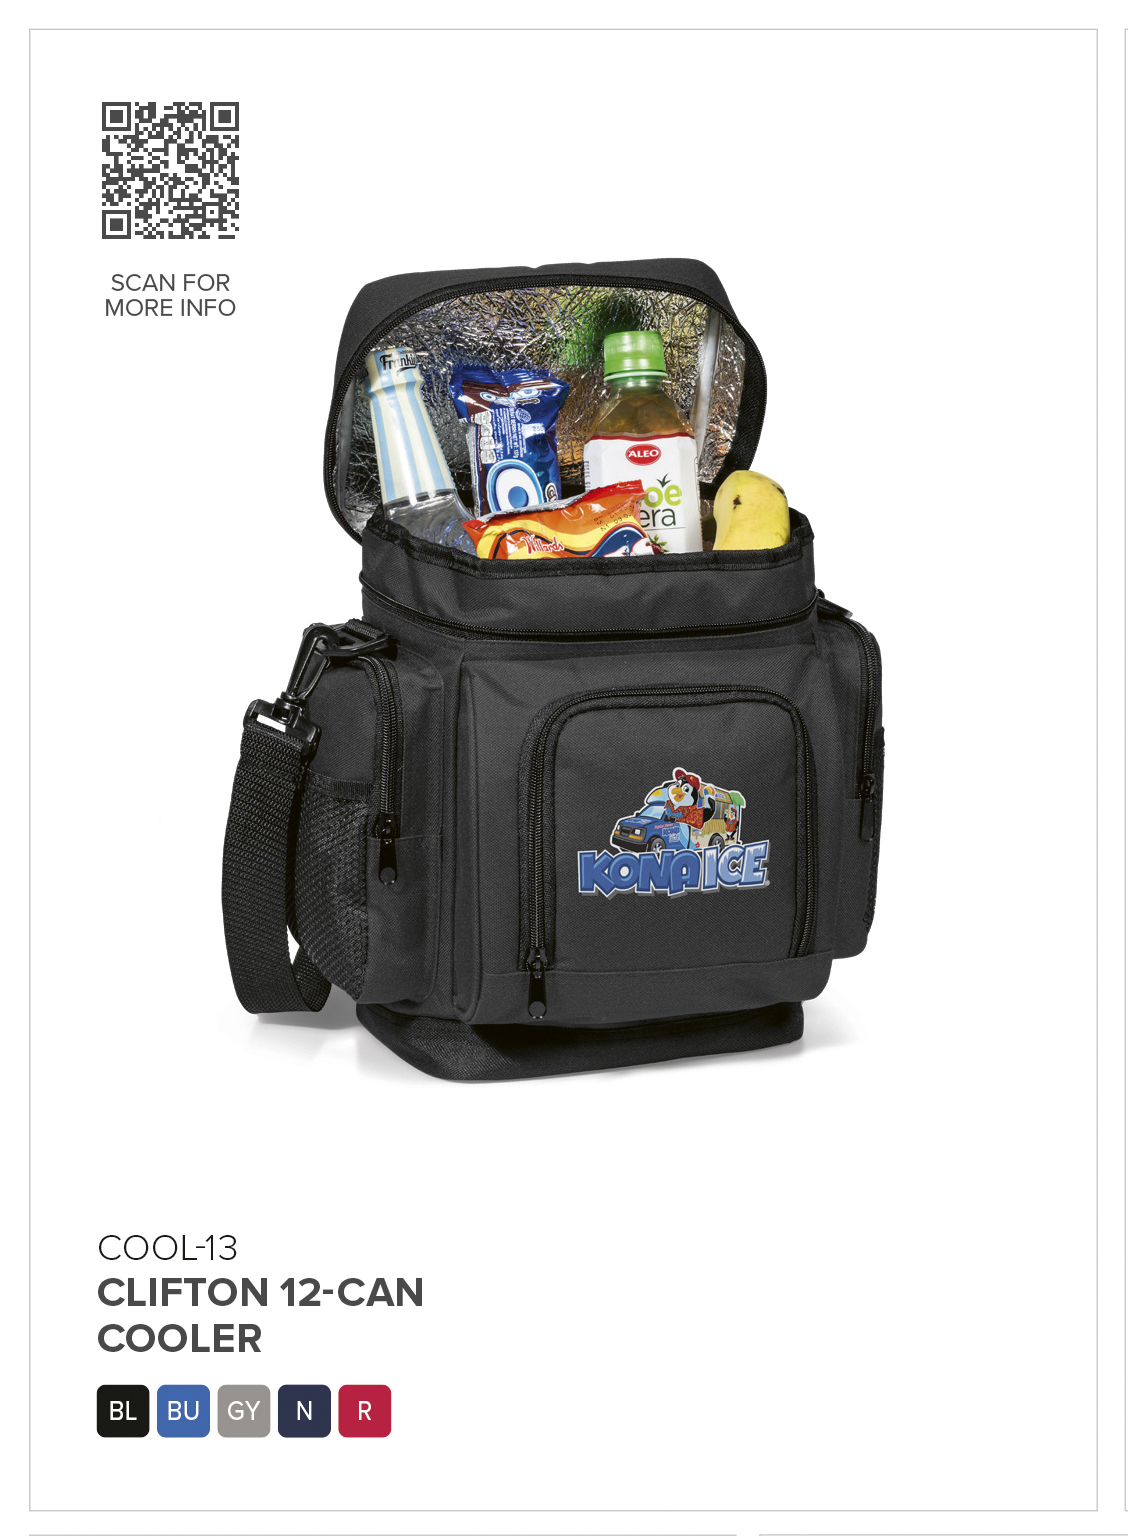 COOL-13 - Clifton 12-Can Cooler - Catalogue Image